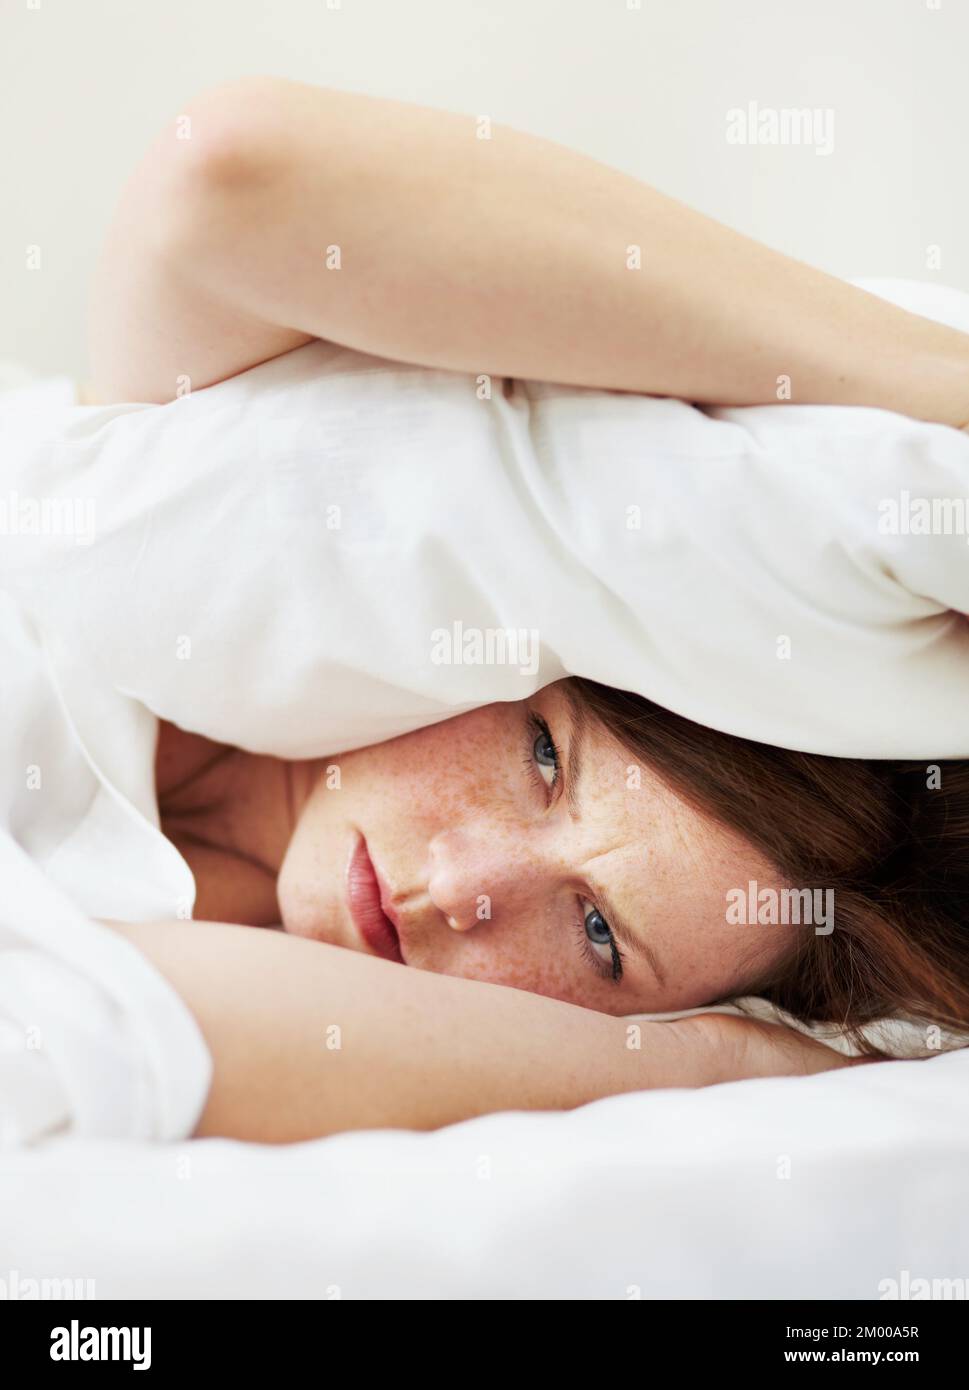 Its too early to be awake. A grumpy looking woman lying in bed with a pillow over her head. Stock Photo